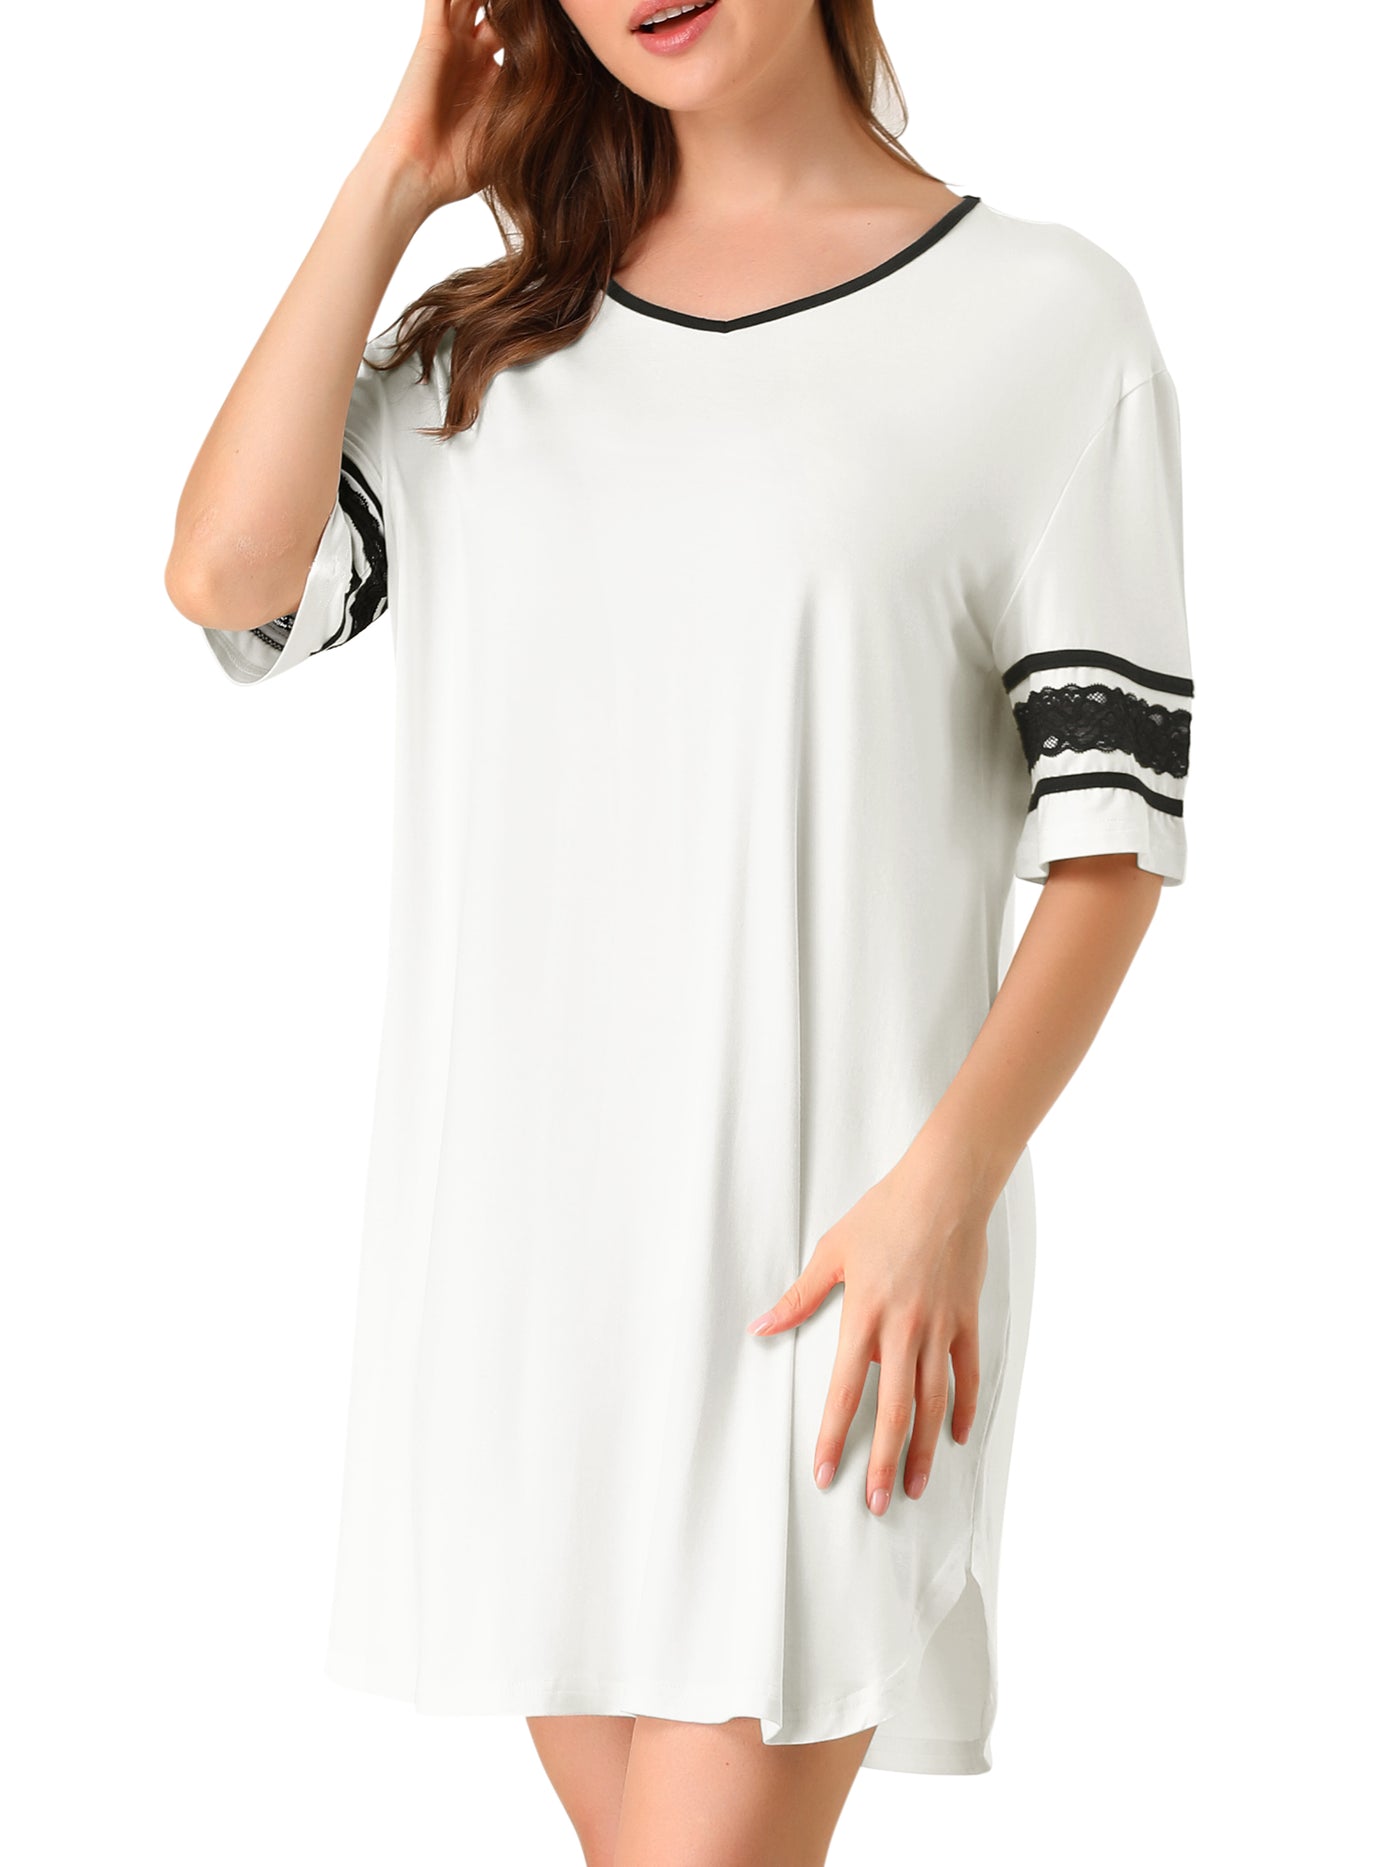 Allegra K Color Contrast Lace Short Sleeve Loose Sleepshirt Soft Nightgowns